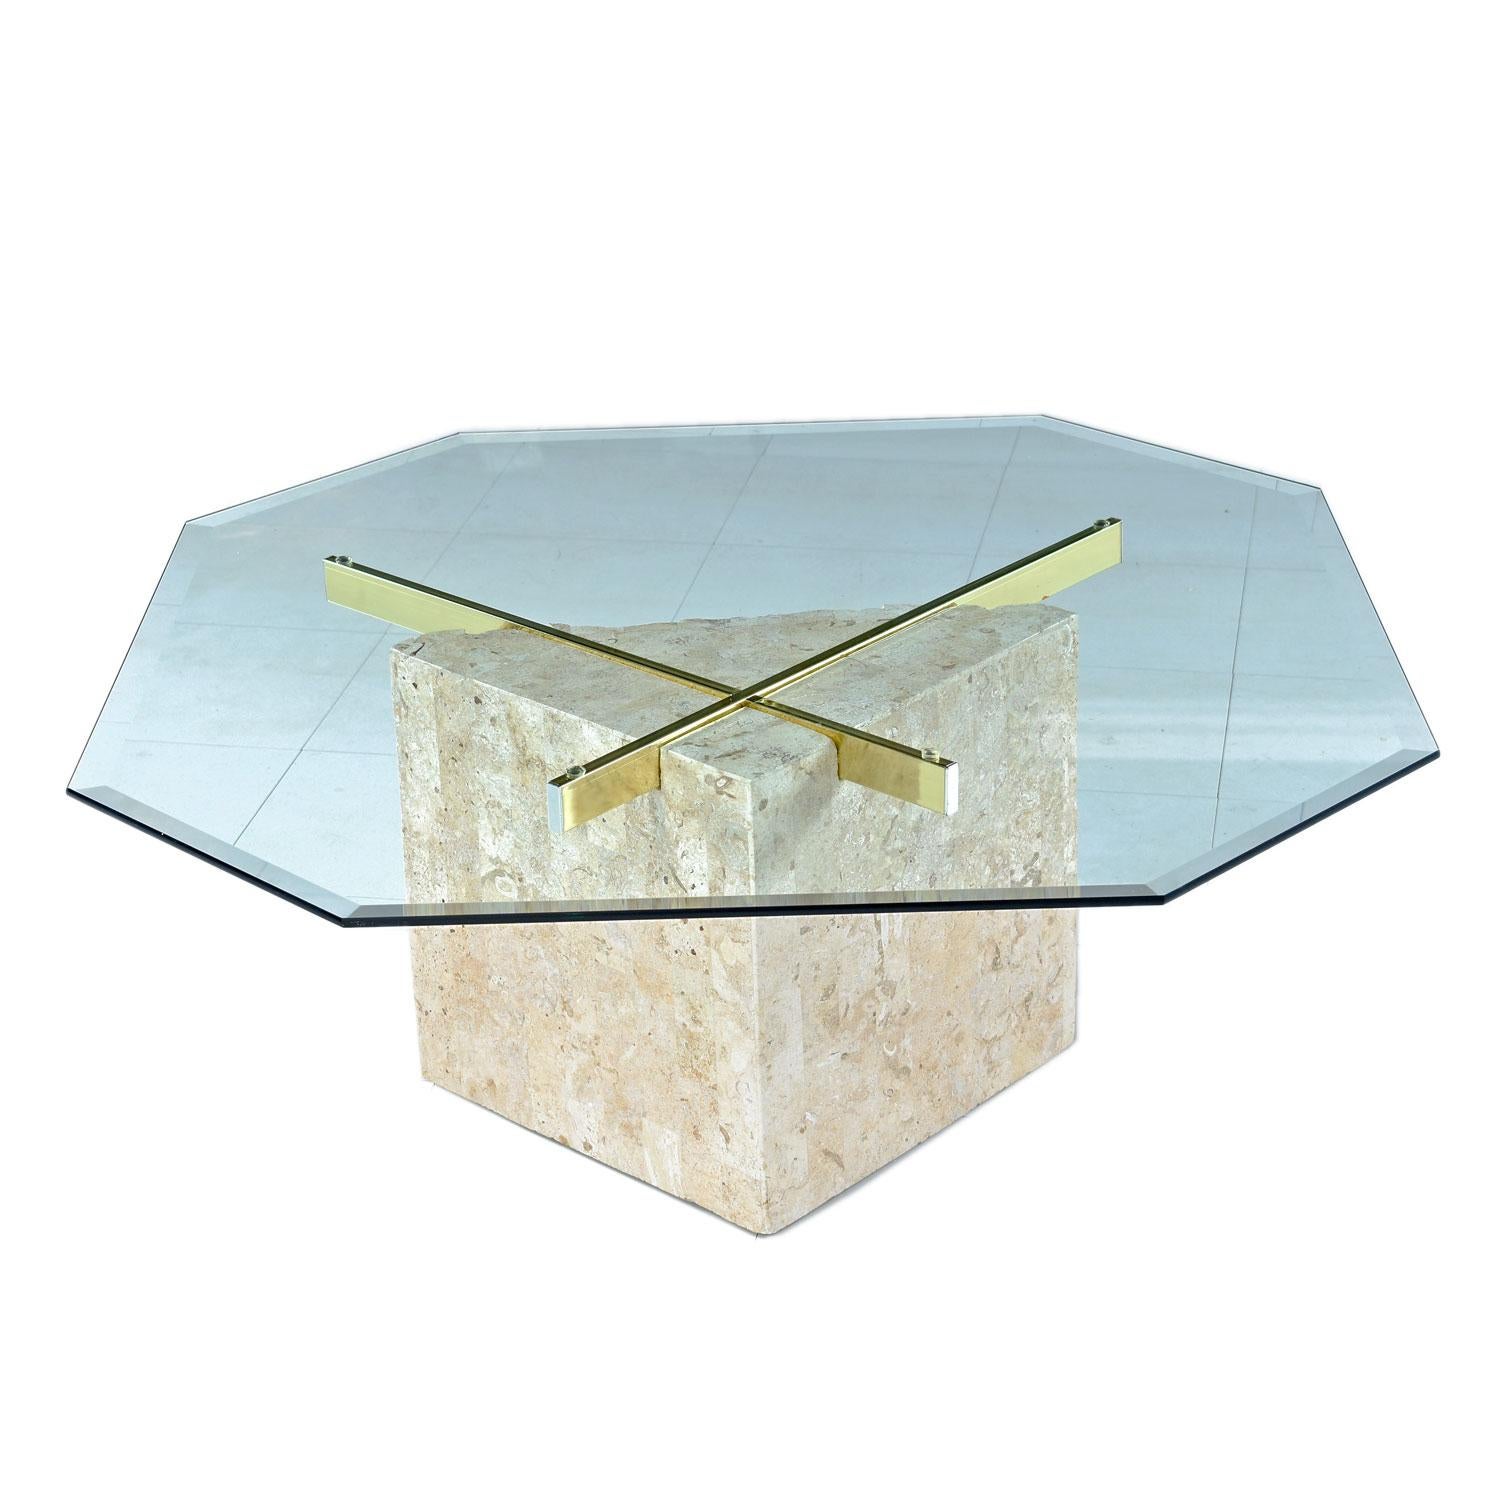 Stunning tessellated stone square pedestal coffee table in the style of Maitland-Smith. Super-sleek, elegant and Classic modern style. The tessellated stone has exotically marbled earth tone veins. The Minimalist design is perfectly complimented and